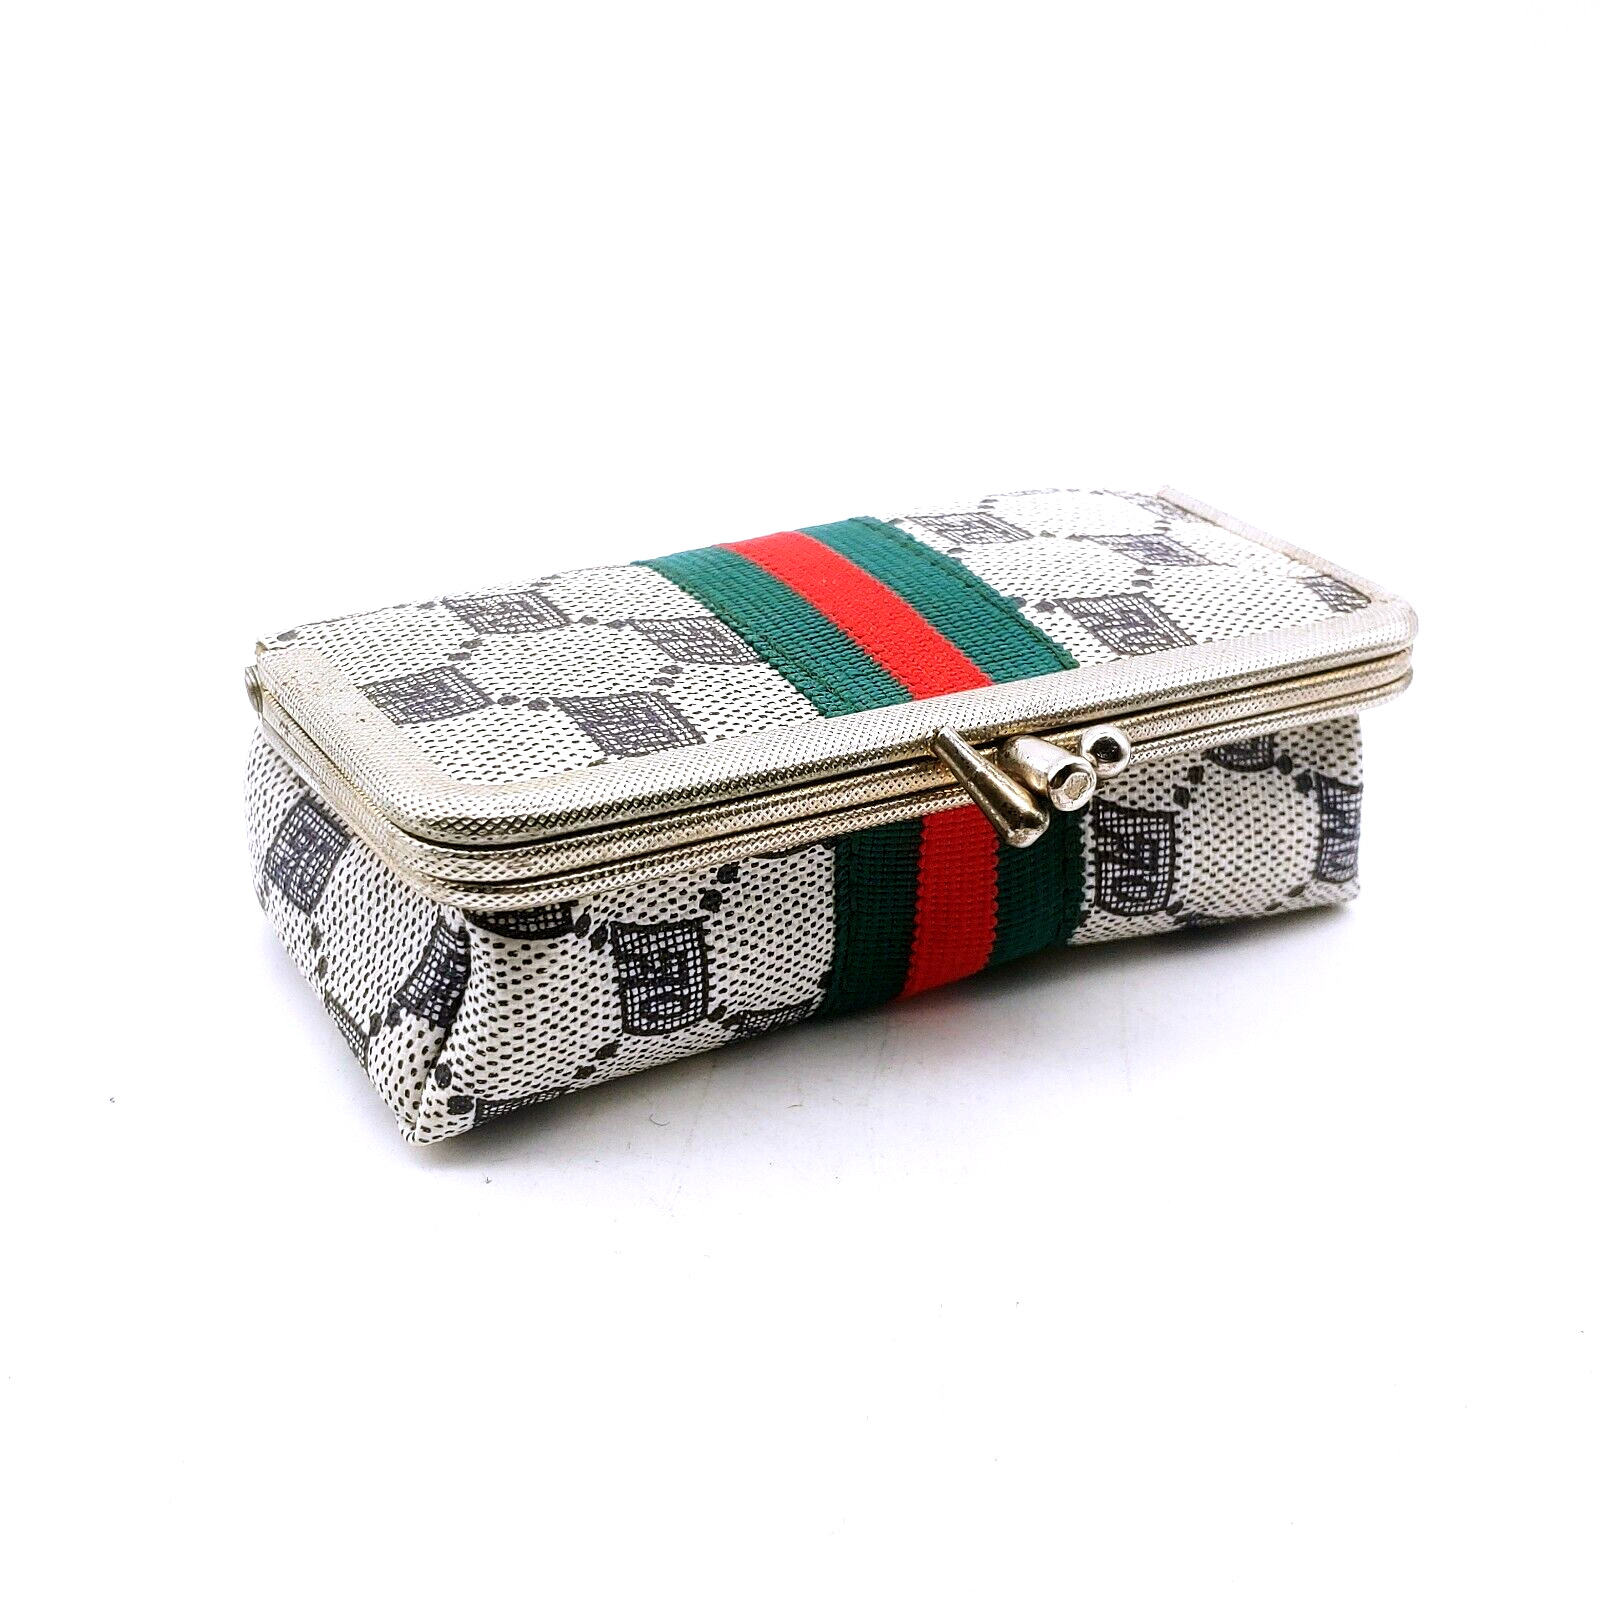 Vintage Sew Clutch Gucci Stripe Sewing Kit Travel Coin Purse Compact Manicure